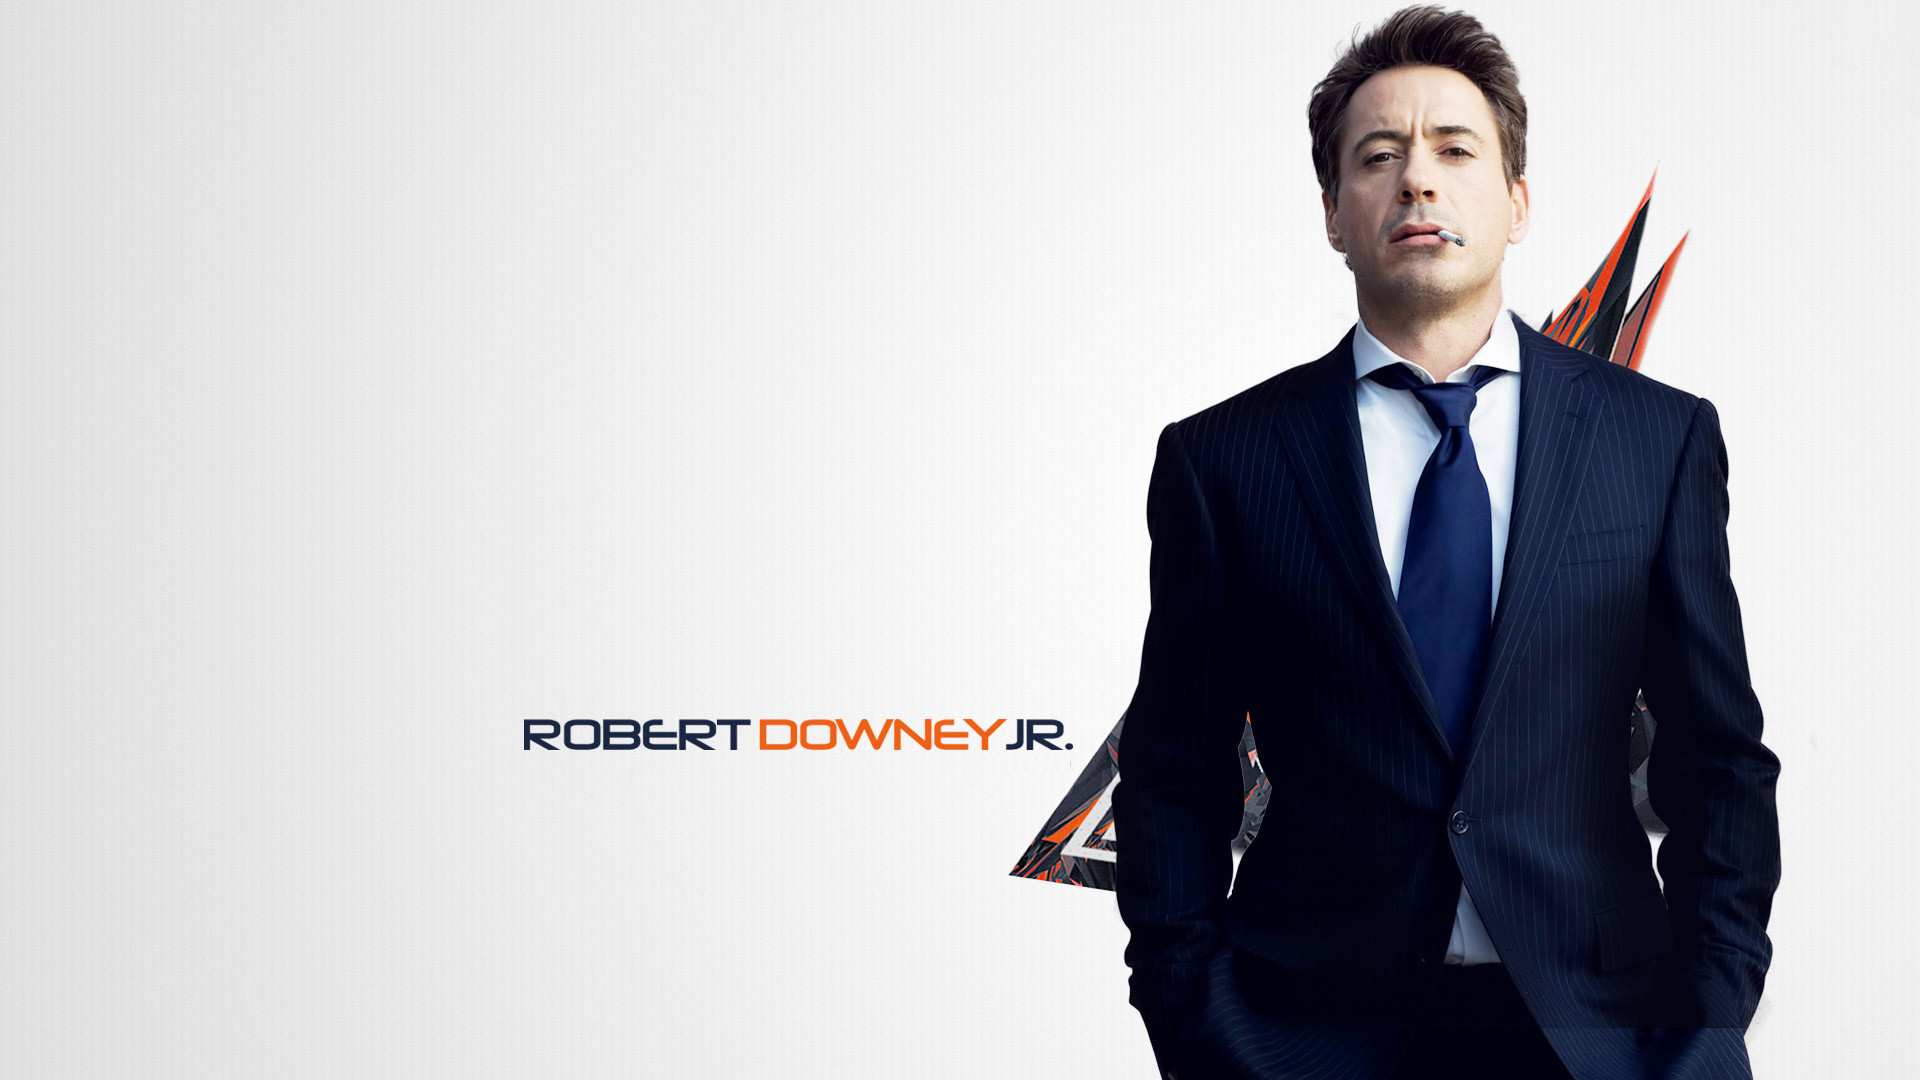 HD Wallpaper Robert Downey Jr High Quality And Definition